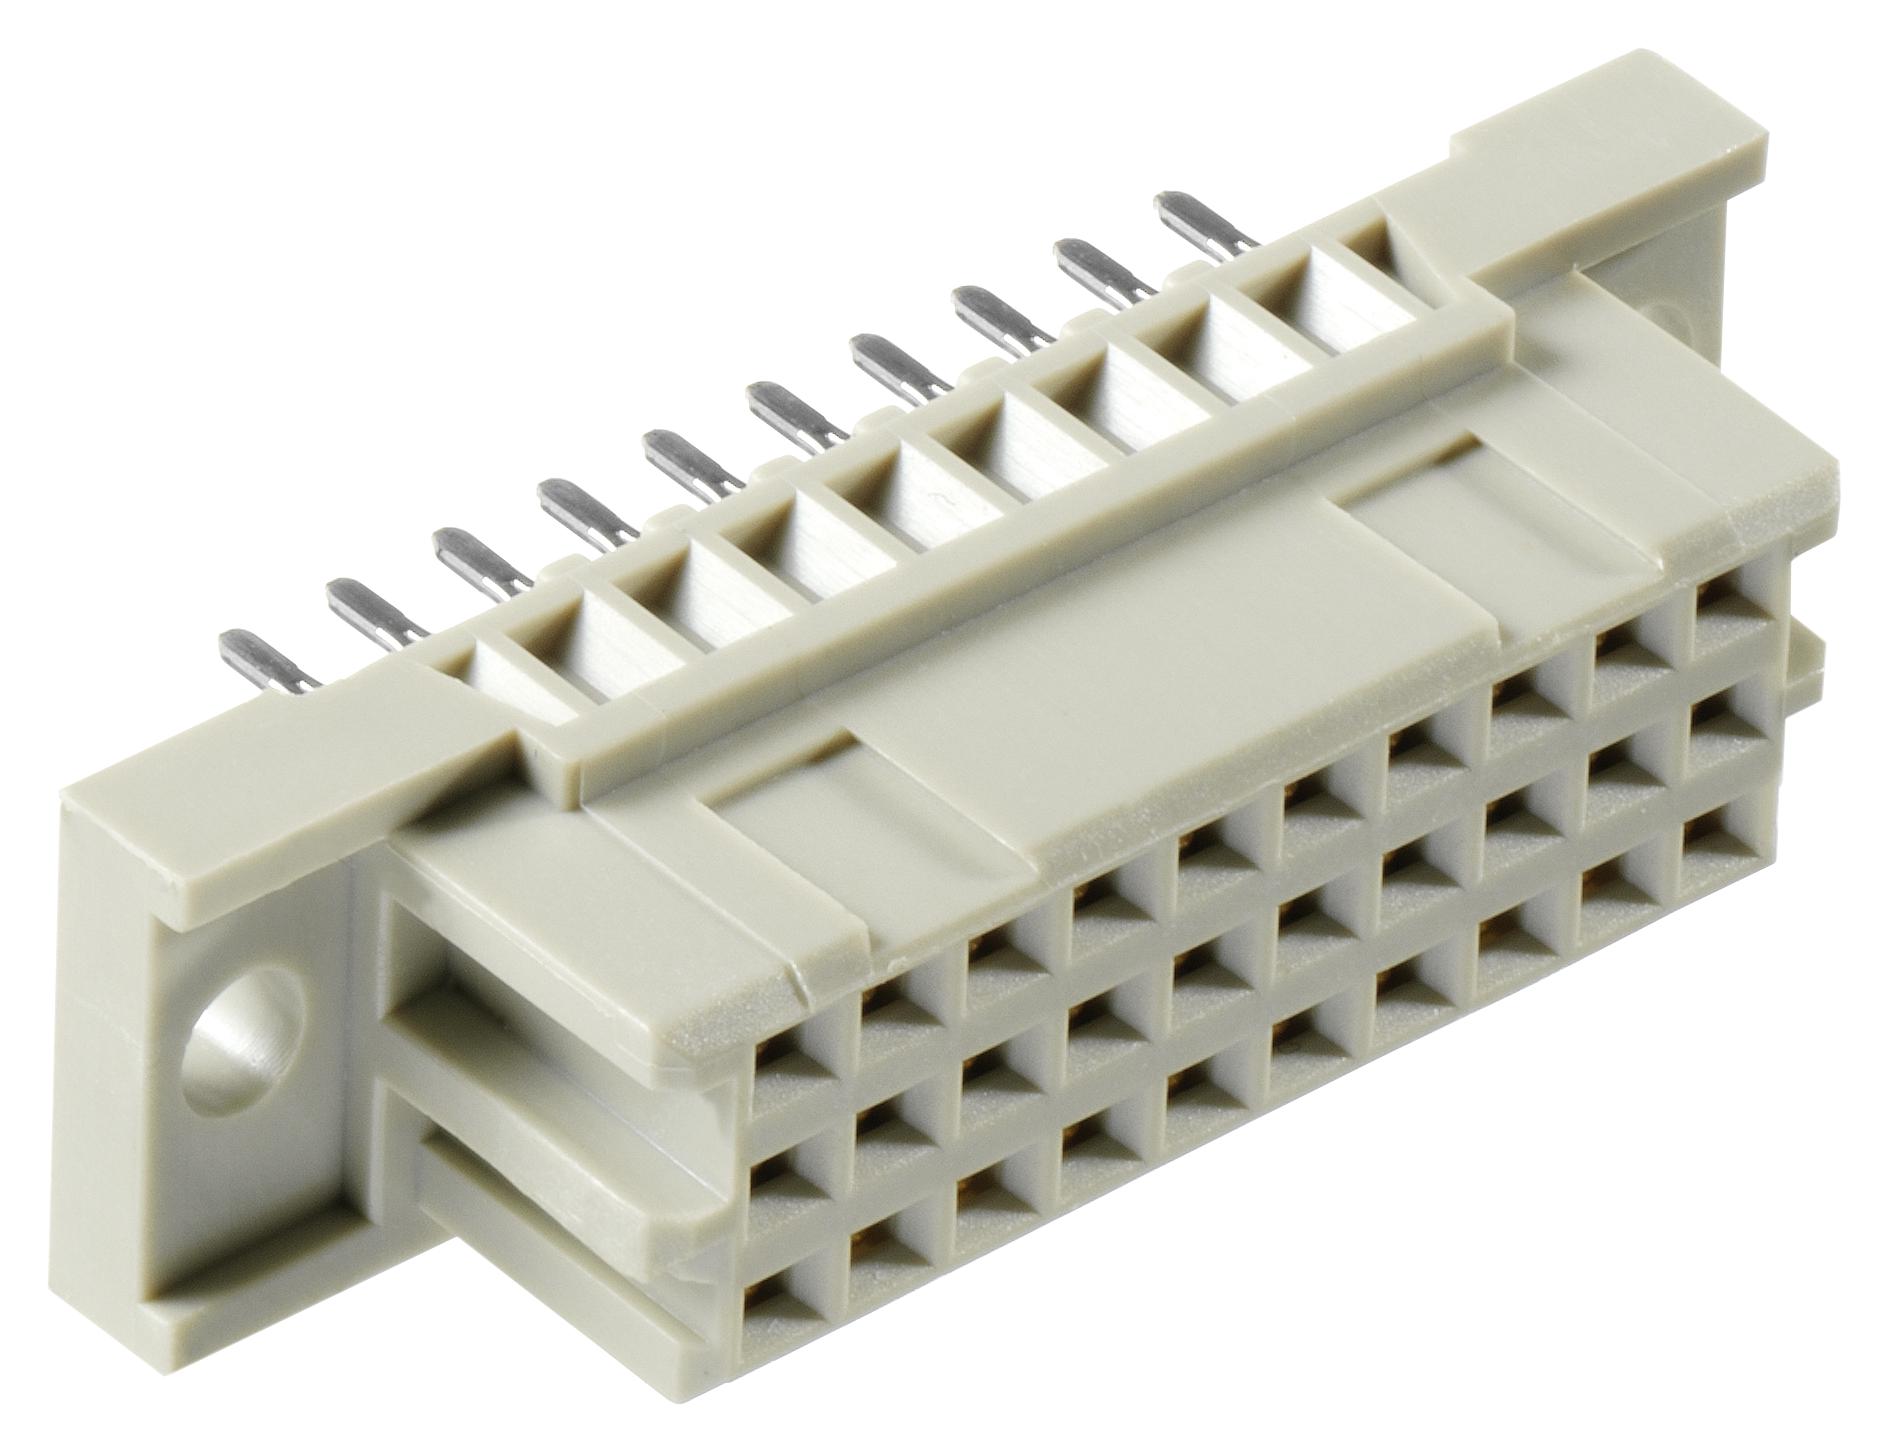 304-80064-01 CONNECTOR, DIN 41612, RCPT, 30P, 3ROW EPT